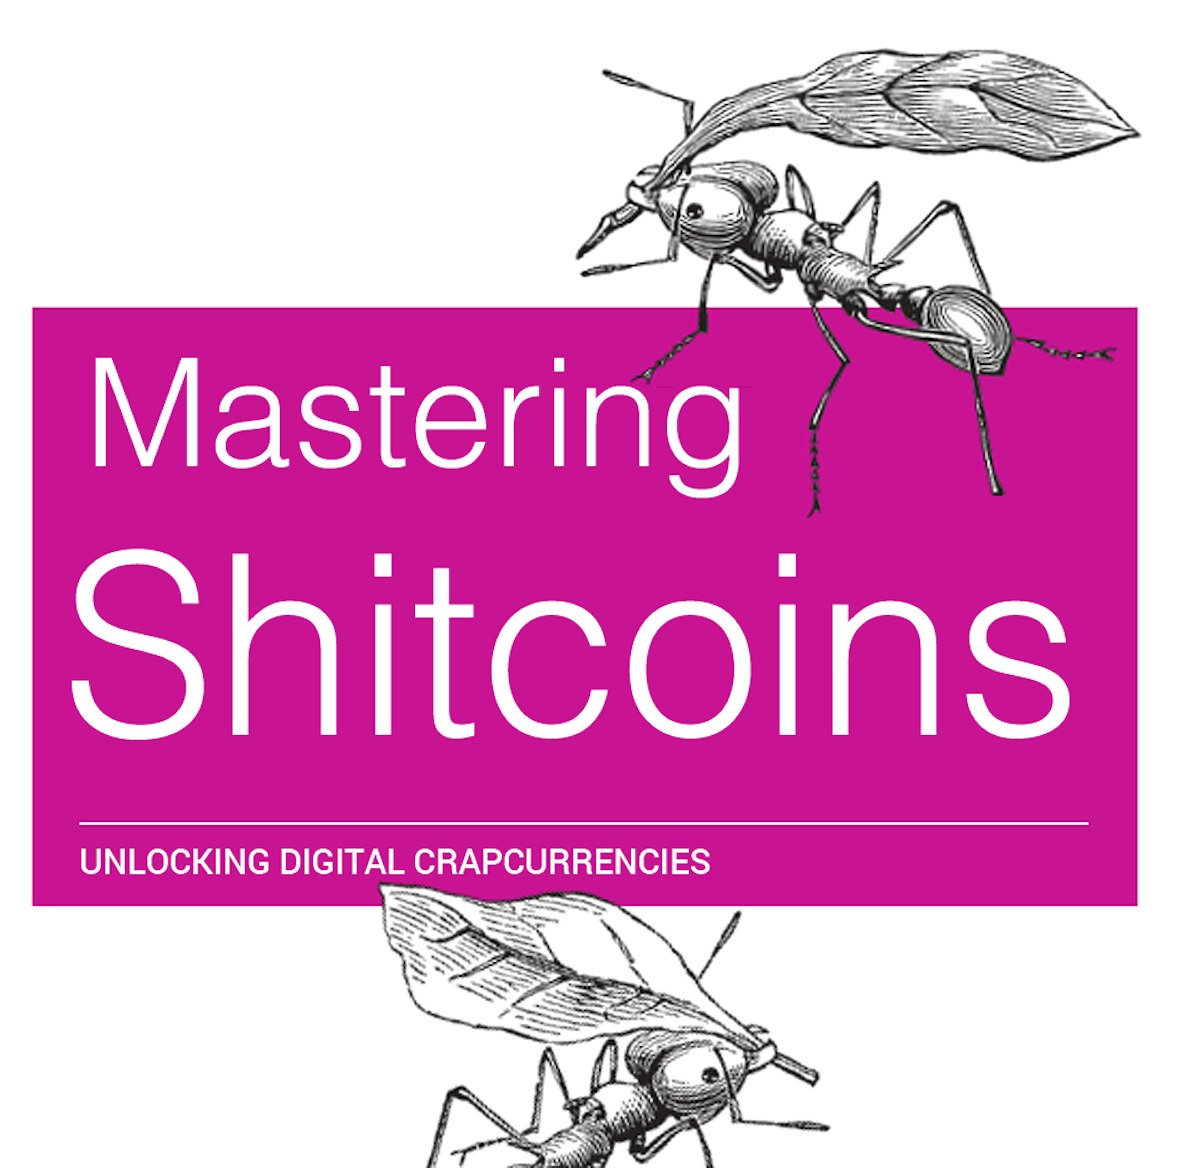 featured image - Mastering Shitcoins: The Poor Man’s Guide to Getting Crypto Rich